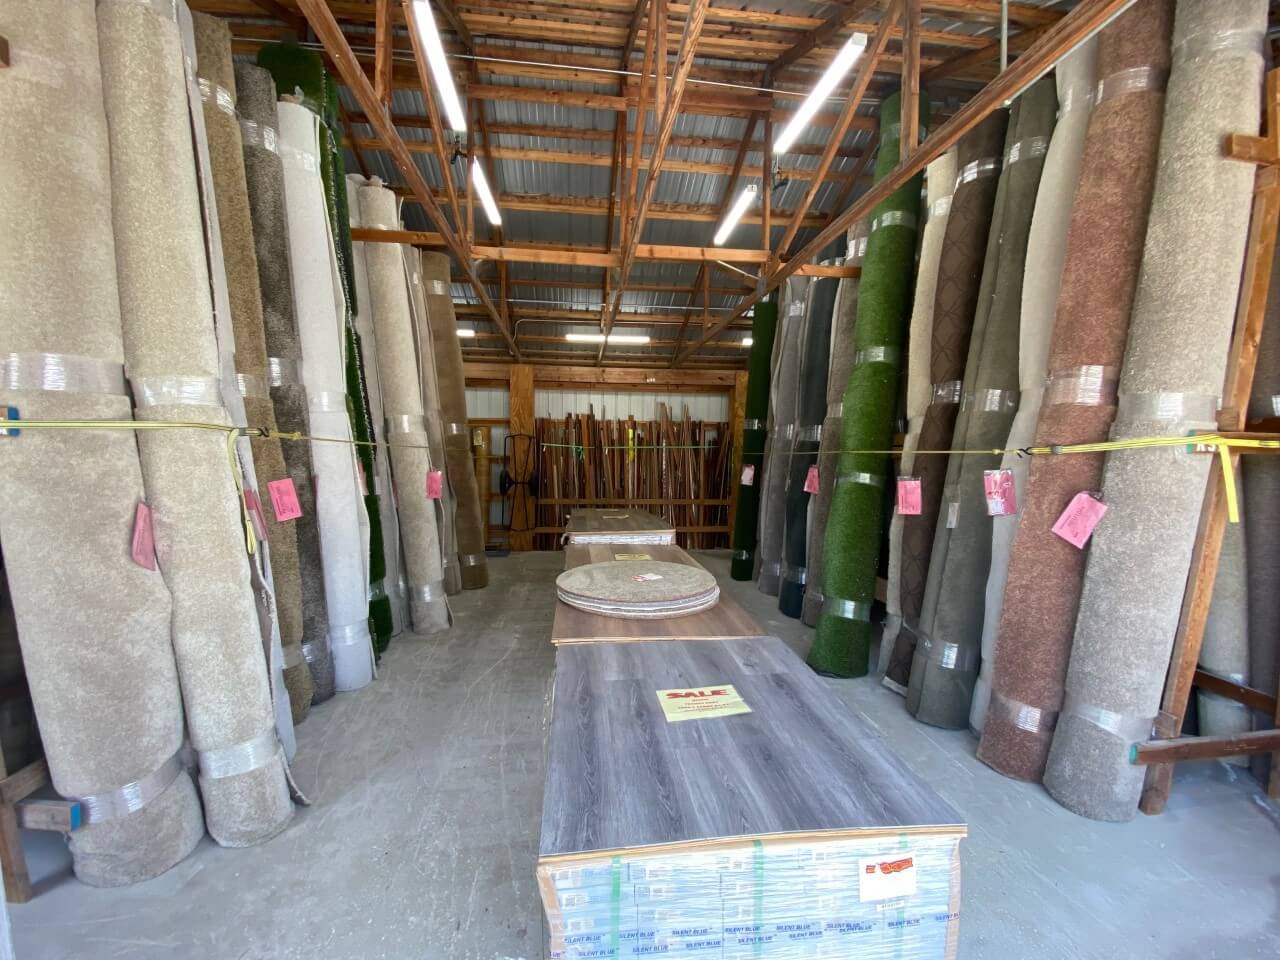 Variety of flooring products at showroom | Ronnie's Carpets & Flooring